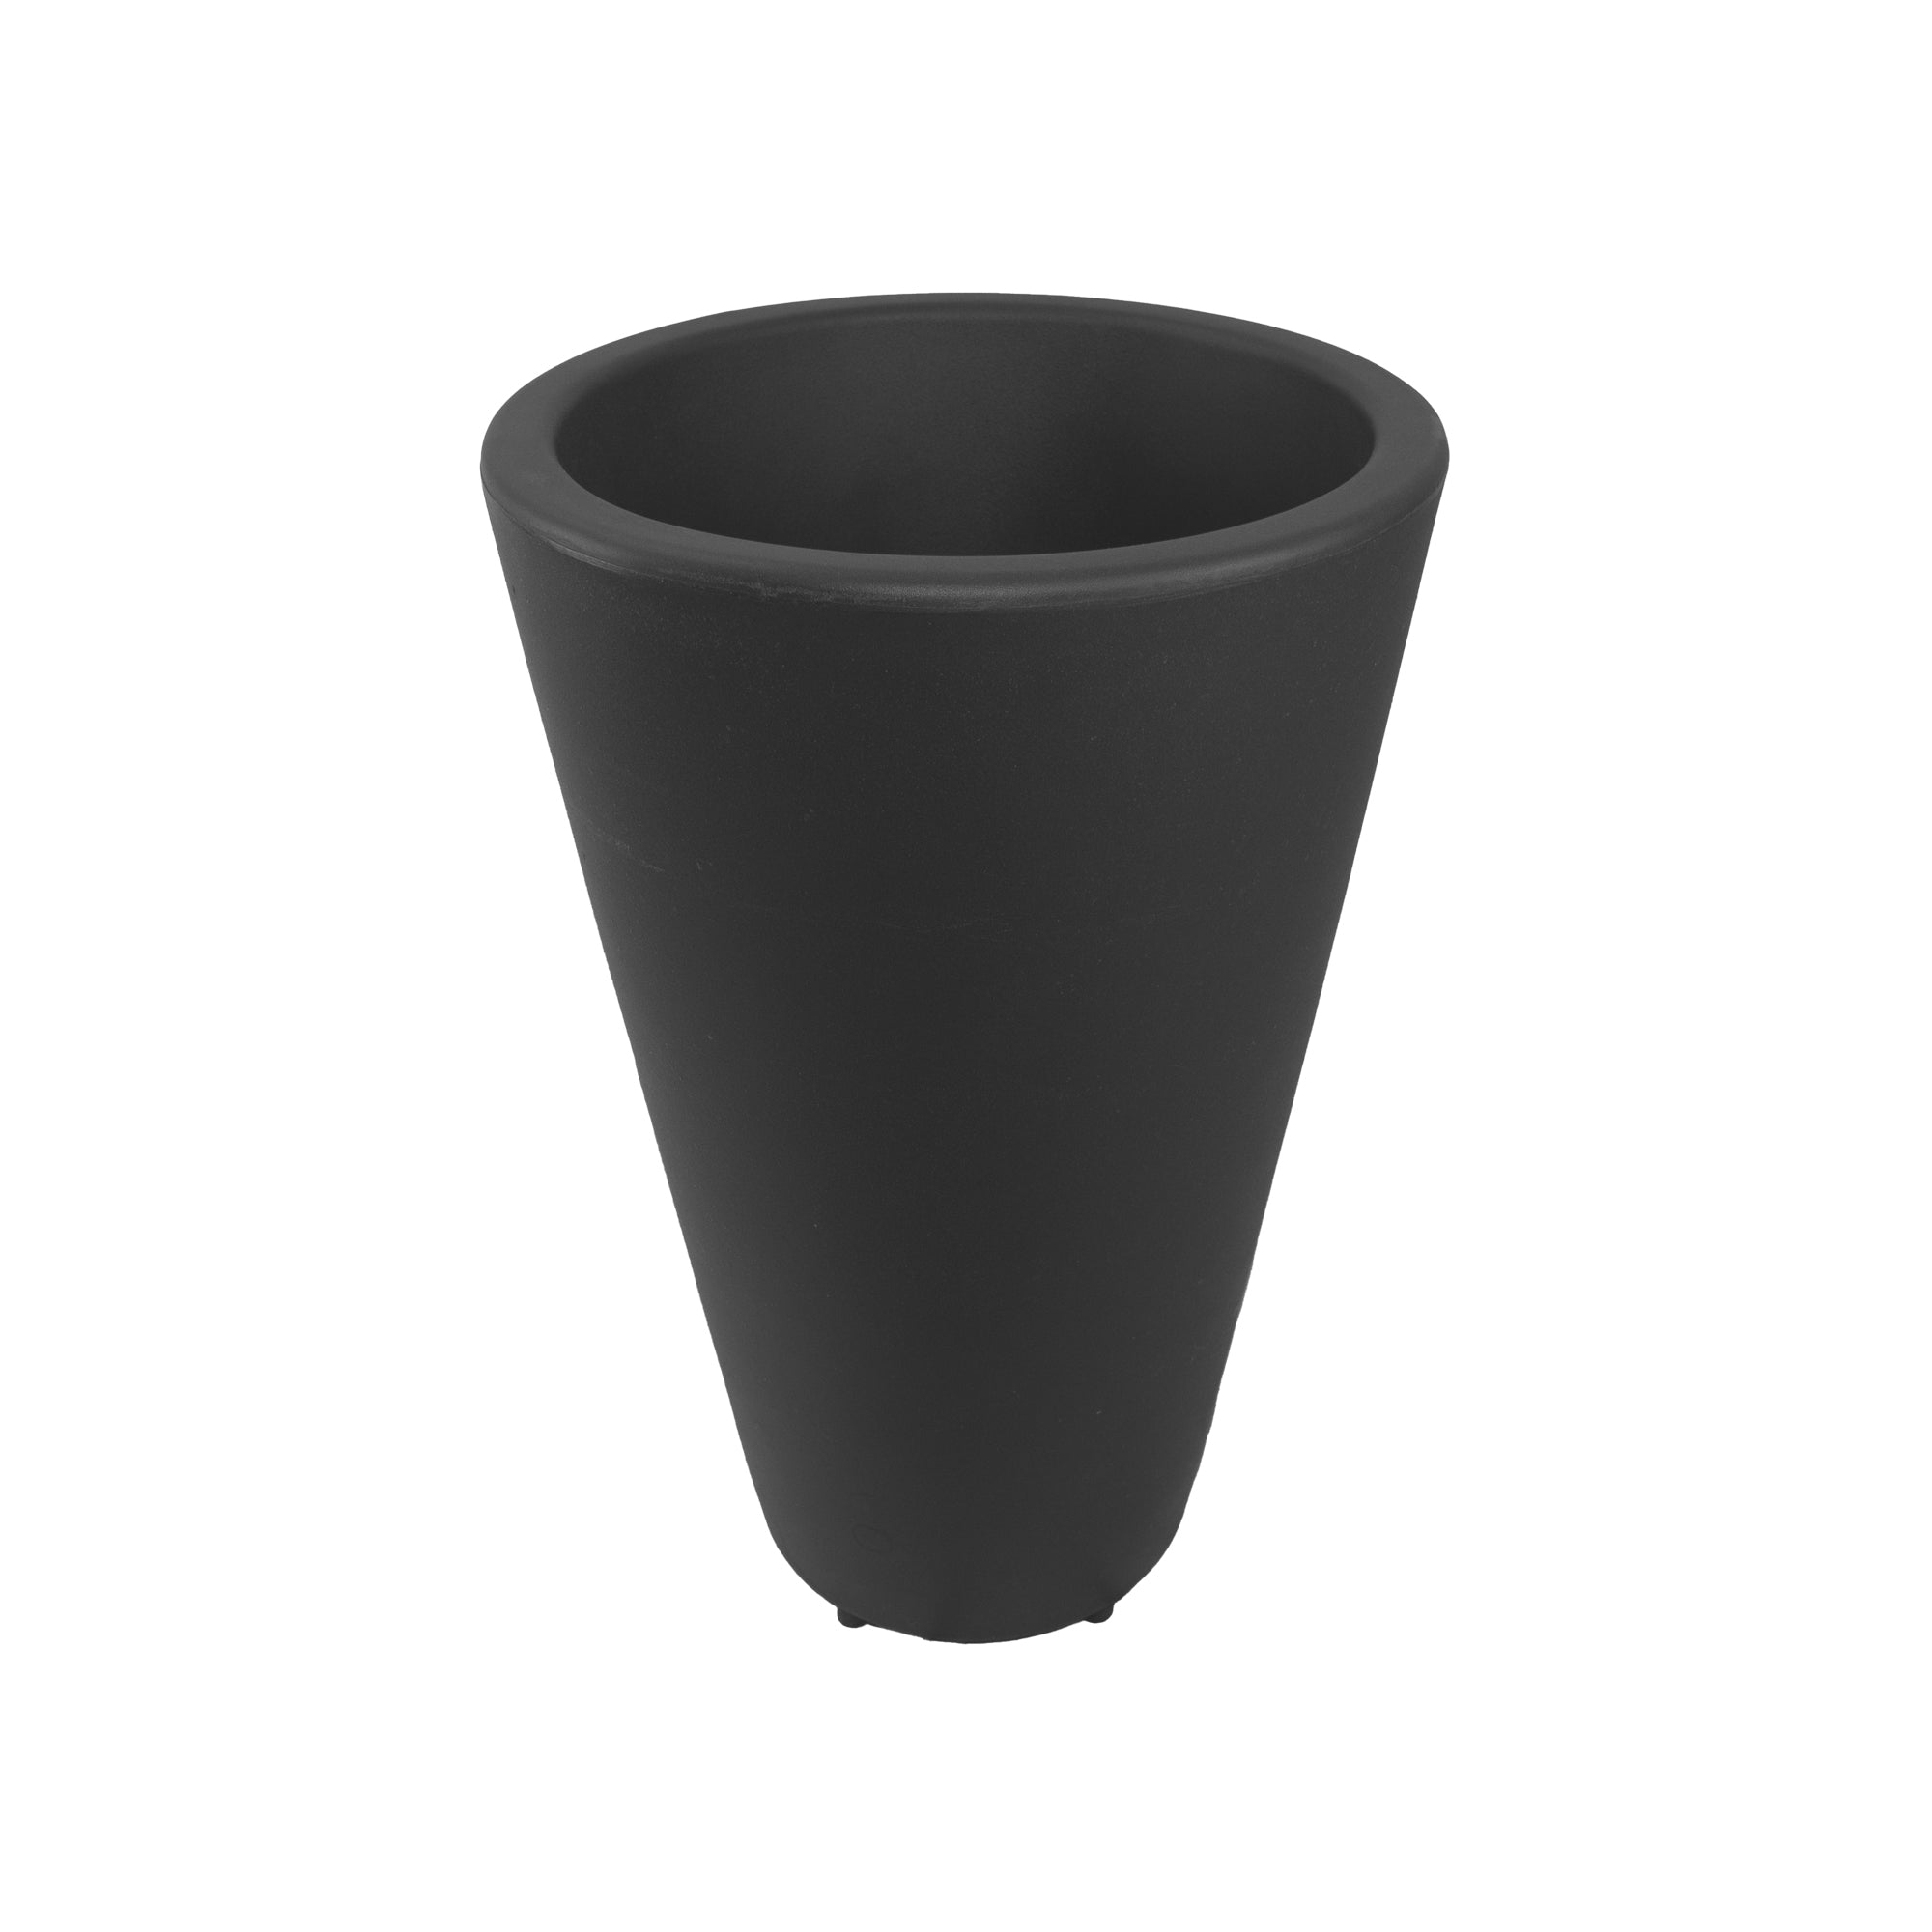 Graphite tall siena planter front isometric